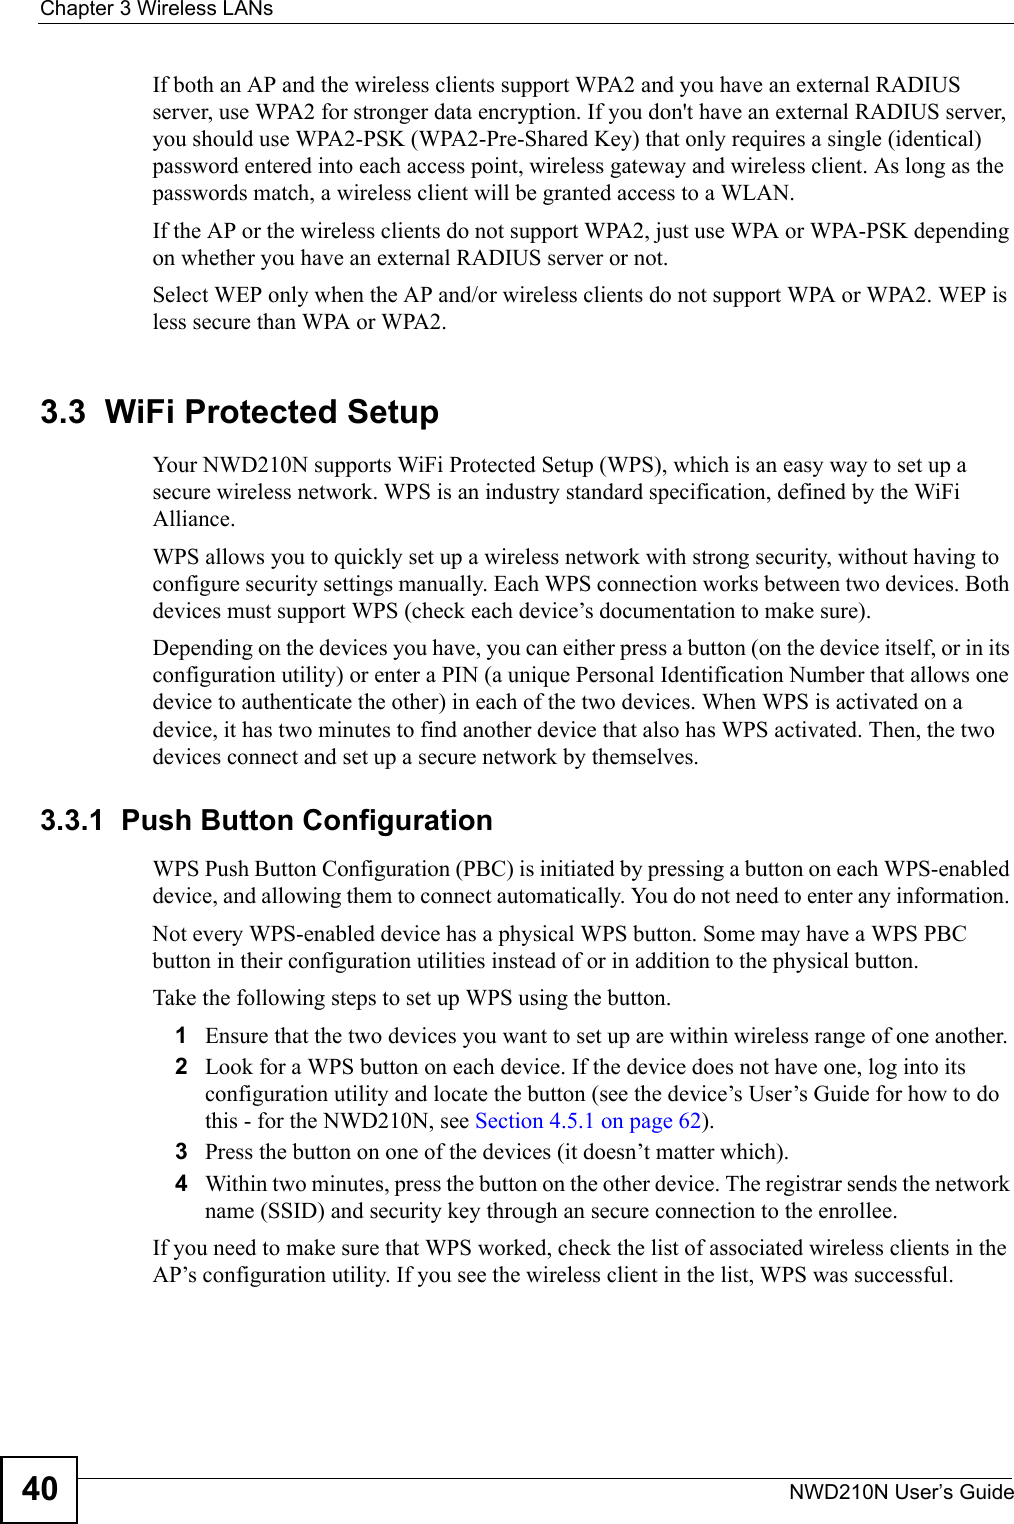 Chapter 3 Wireless LANsNWD210N User’s Guide40If both an AP and the wireless clients support WPA2 and you have an external RADIUS server, use WPA2 for stronger data encryption. If you don&apos;t have an external RADIUS server, you should use WPA2-PSK (WPA2-Pre-Shared Key) that only requires a single (identical) password entered into each access point, wireless gateway and wireless client. As long as the passwords match, a wireless client will be granted access to a WLAN. If the AP or the wireless clients do not support WPA2, just use WPA or WPA-PSK depending on whether you have an external RADIUS server or not.Select WEP only when the AP and/or wireless clients do not support WPA or WPA2. WEP is less secure than WPA or WPA2.3.3  WiFi Protected SetupYour NWD210N supports WiFi Protected Setup (WPS), which is an easy way to set up a secure wireless network. WPS is an industry standard specification, defined by the WiFi Alliance.WPS allows you to quickly set up a wireless network with strong security, without having to configure security settings manually. Each WPS connection works between two devices. Both devices must support WPS (check each device’s documentation to make sure). Depending on the devices you have, you can either press a button (on the device itself, or in its configuration utility) or enter a PIN (a unique Personal Identification Number that allows one device to authenticate the other) in each of the two devices. When WPS is activated on a device, it has two minutes to find another device that also has WPS activated. Then, the two devices connect and set up a secure network by themselves.3.3.1  Push Button ConfigurationWPS Push Button Configuration (PBC) is initiated by pressing a button on each WPS-enabled device, and allowing them to connect automatically. You do not need to enter any information. Not every WPS-enabled device has a physical WPS button. Some may have a WPS PBC button in their configuration utilities instead of or in addition to the physical button.Take the following steps to set up WPS using the button.1Ensure that the two devices you want to set up are within wireless range of one another. 2Look for a WPS button on each device. If the device does not have one, log into its configuration utility and locate the button (see the device’s User’s Guide for how to do this - for the NWD210N, see Section 4.5.1 on page 62).3Press the button on one of the devices (it doesn’t matter which).4Within two minutes, press the button on the other device. The registrar sends the network name (SSID) and security key through an secure connection to the enrollee.If you need to make sure that WPS worked, check the list of associated wireless clients in the AP’s configuration utility. If you see the wireless client in the list, WPS was successful.